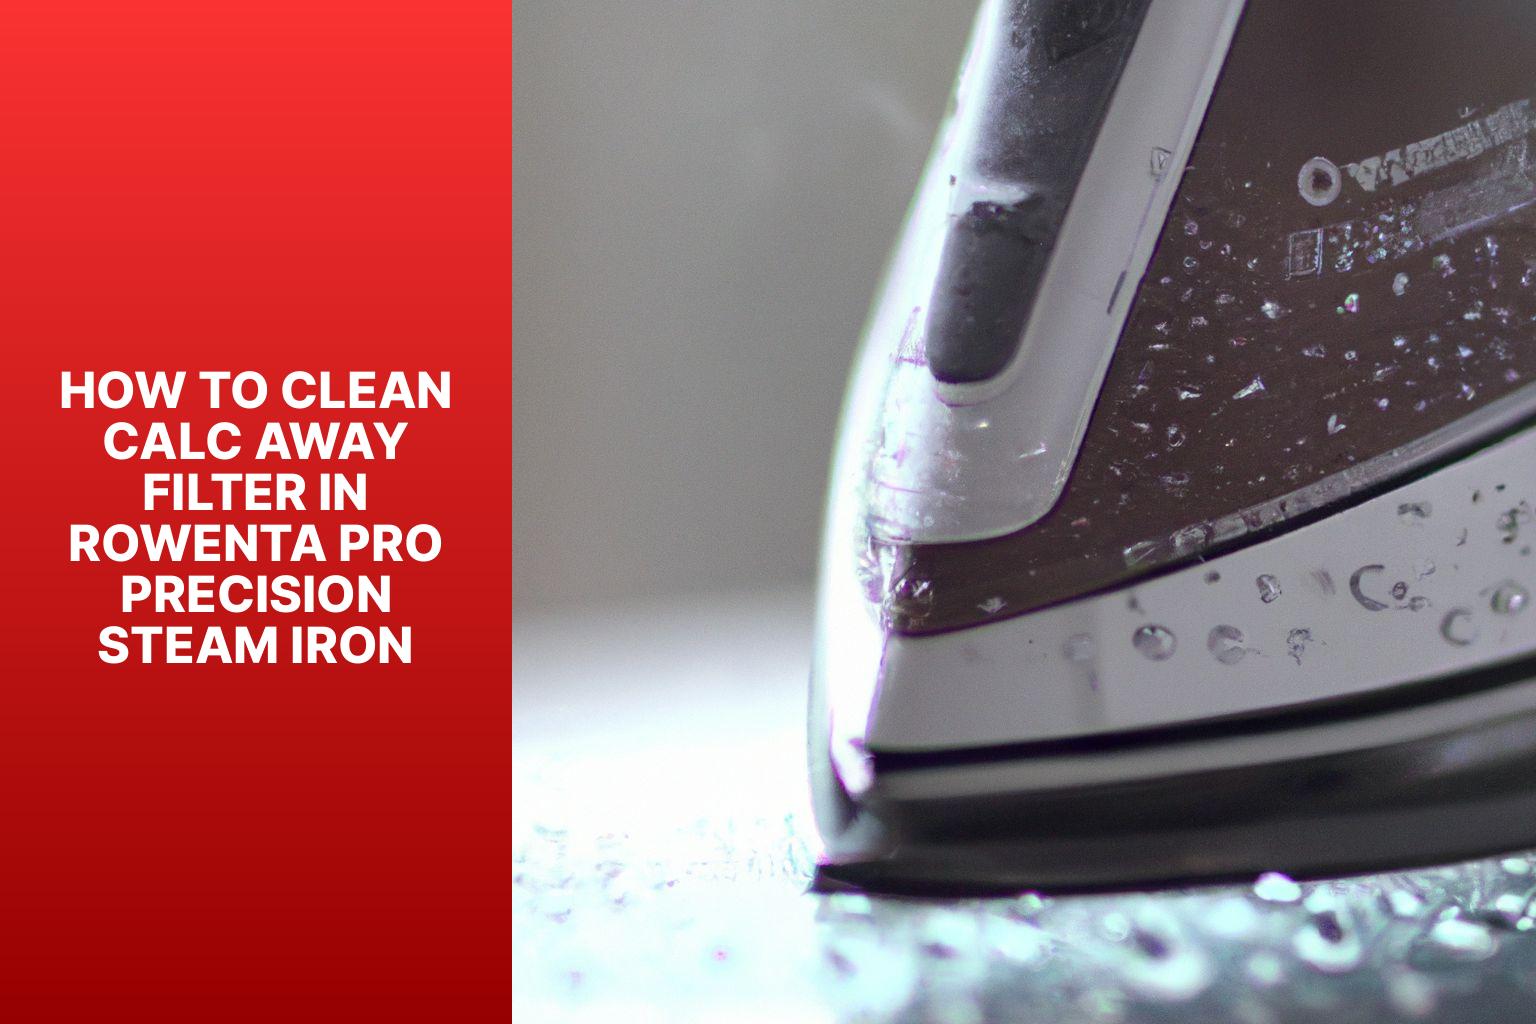 How To Clean Calc Away Filter In Rowenta Pro Precision Steam Iron